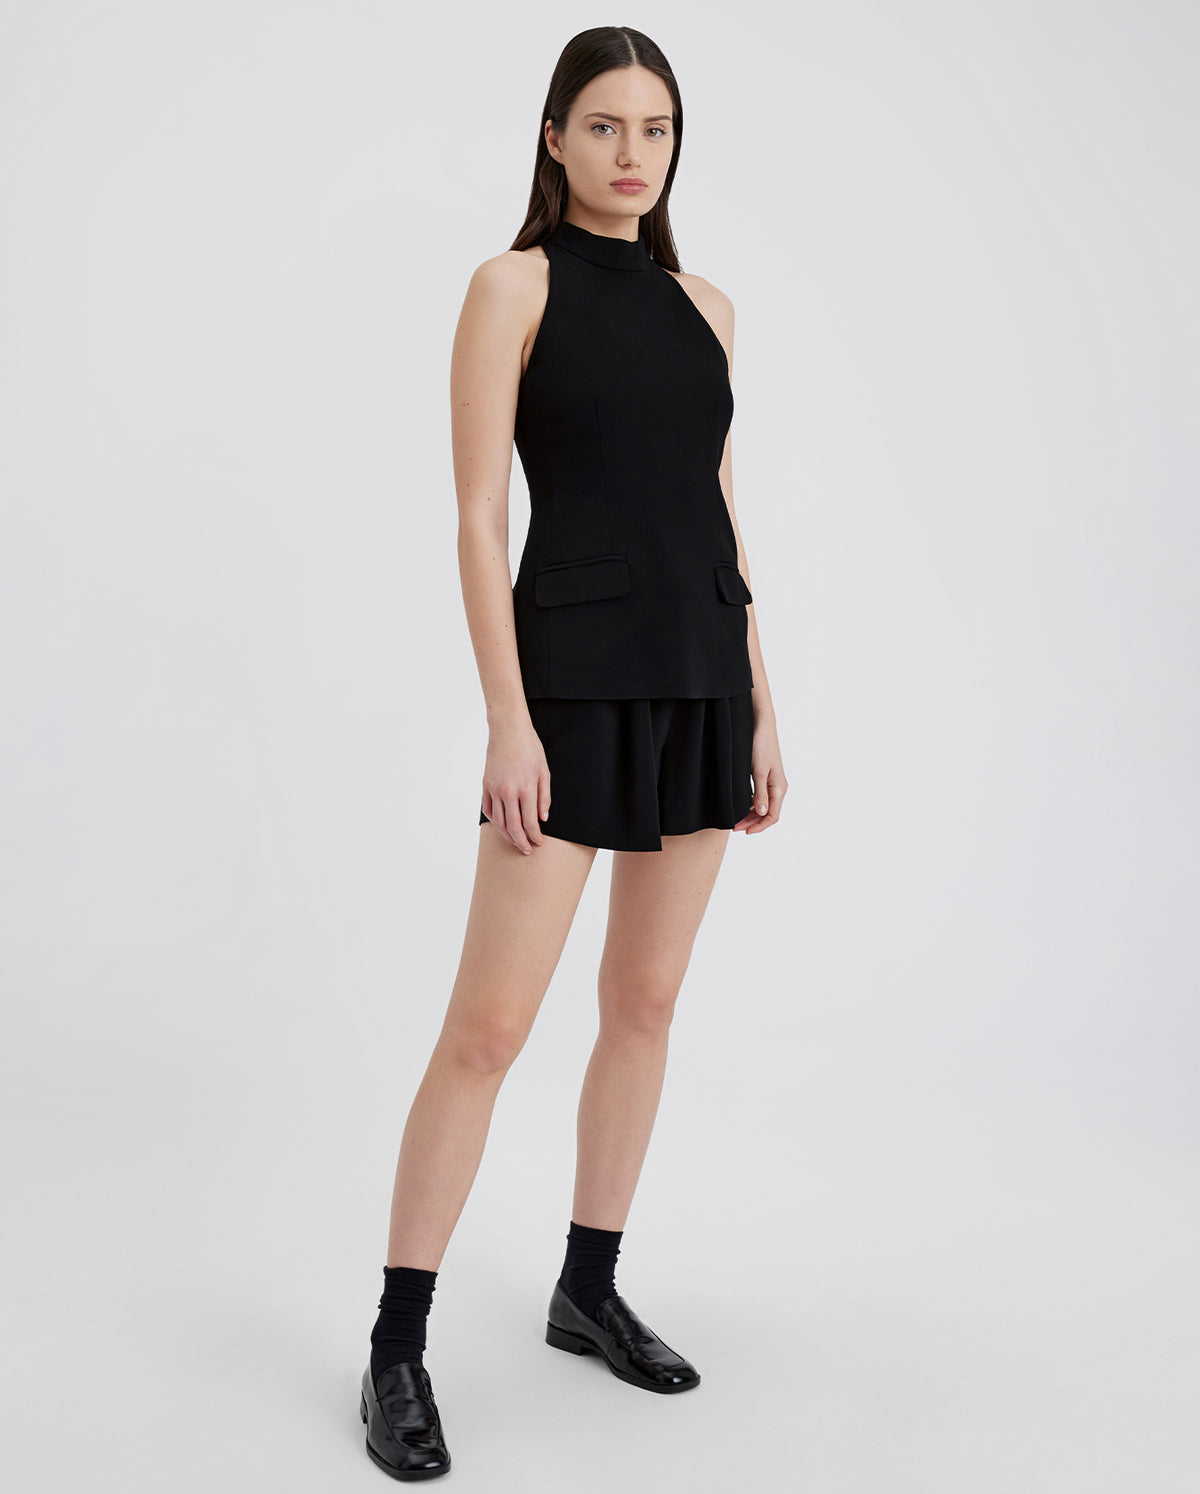 The Ronit Short Sleeve Top - Noir